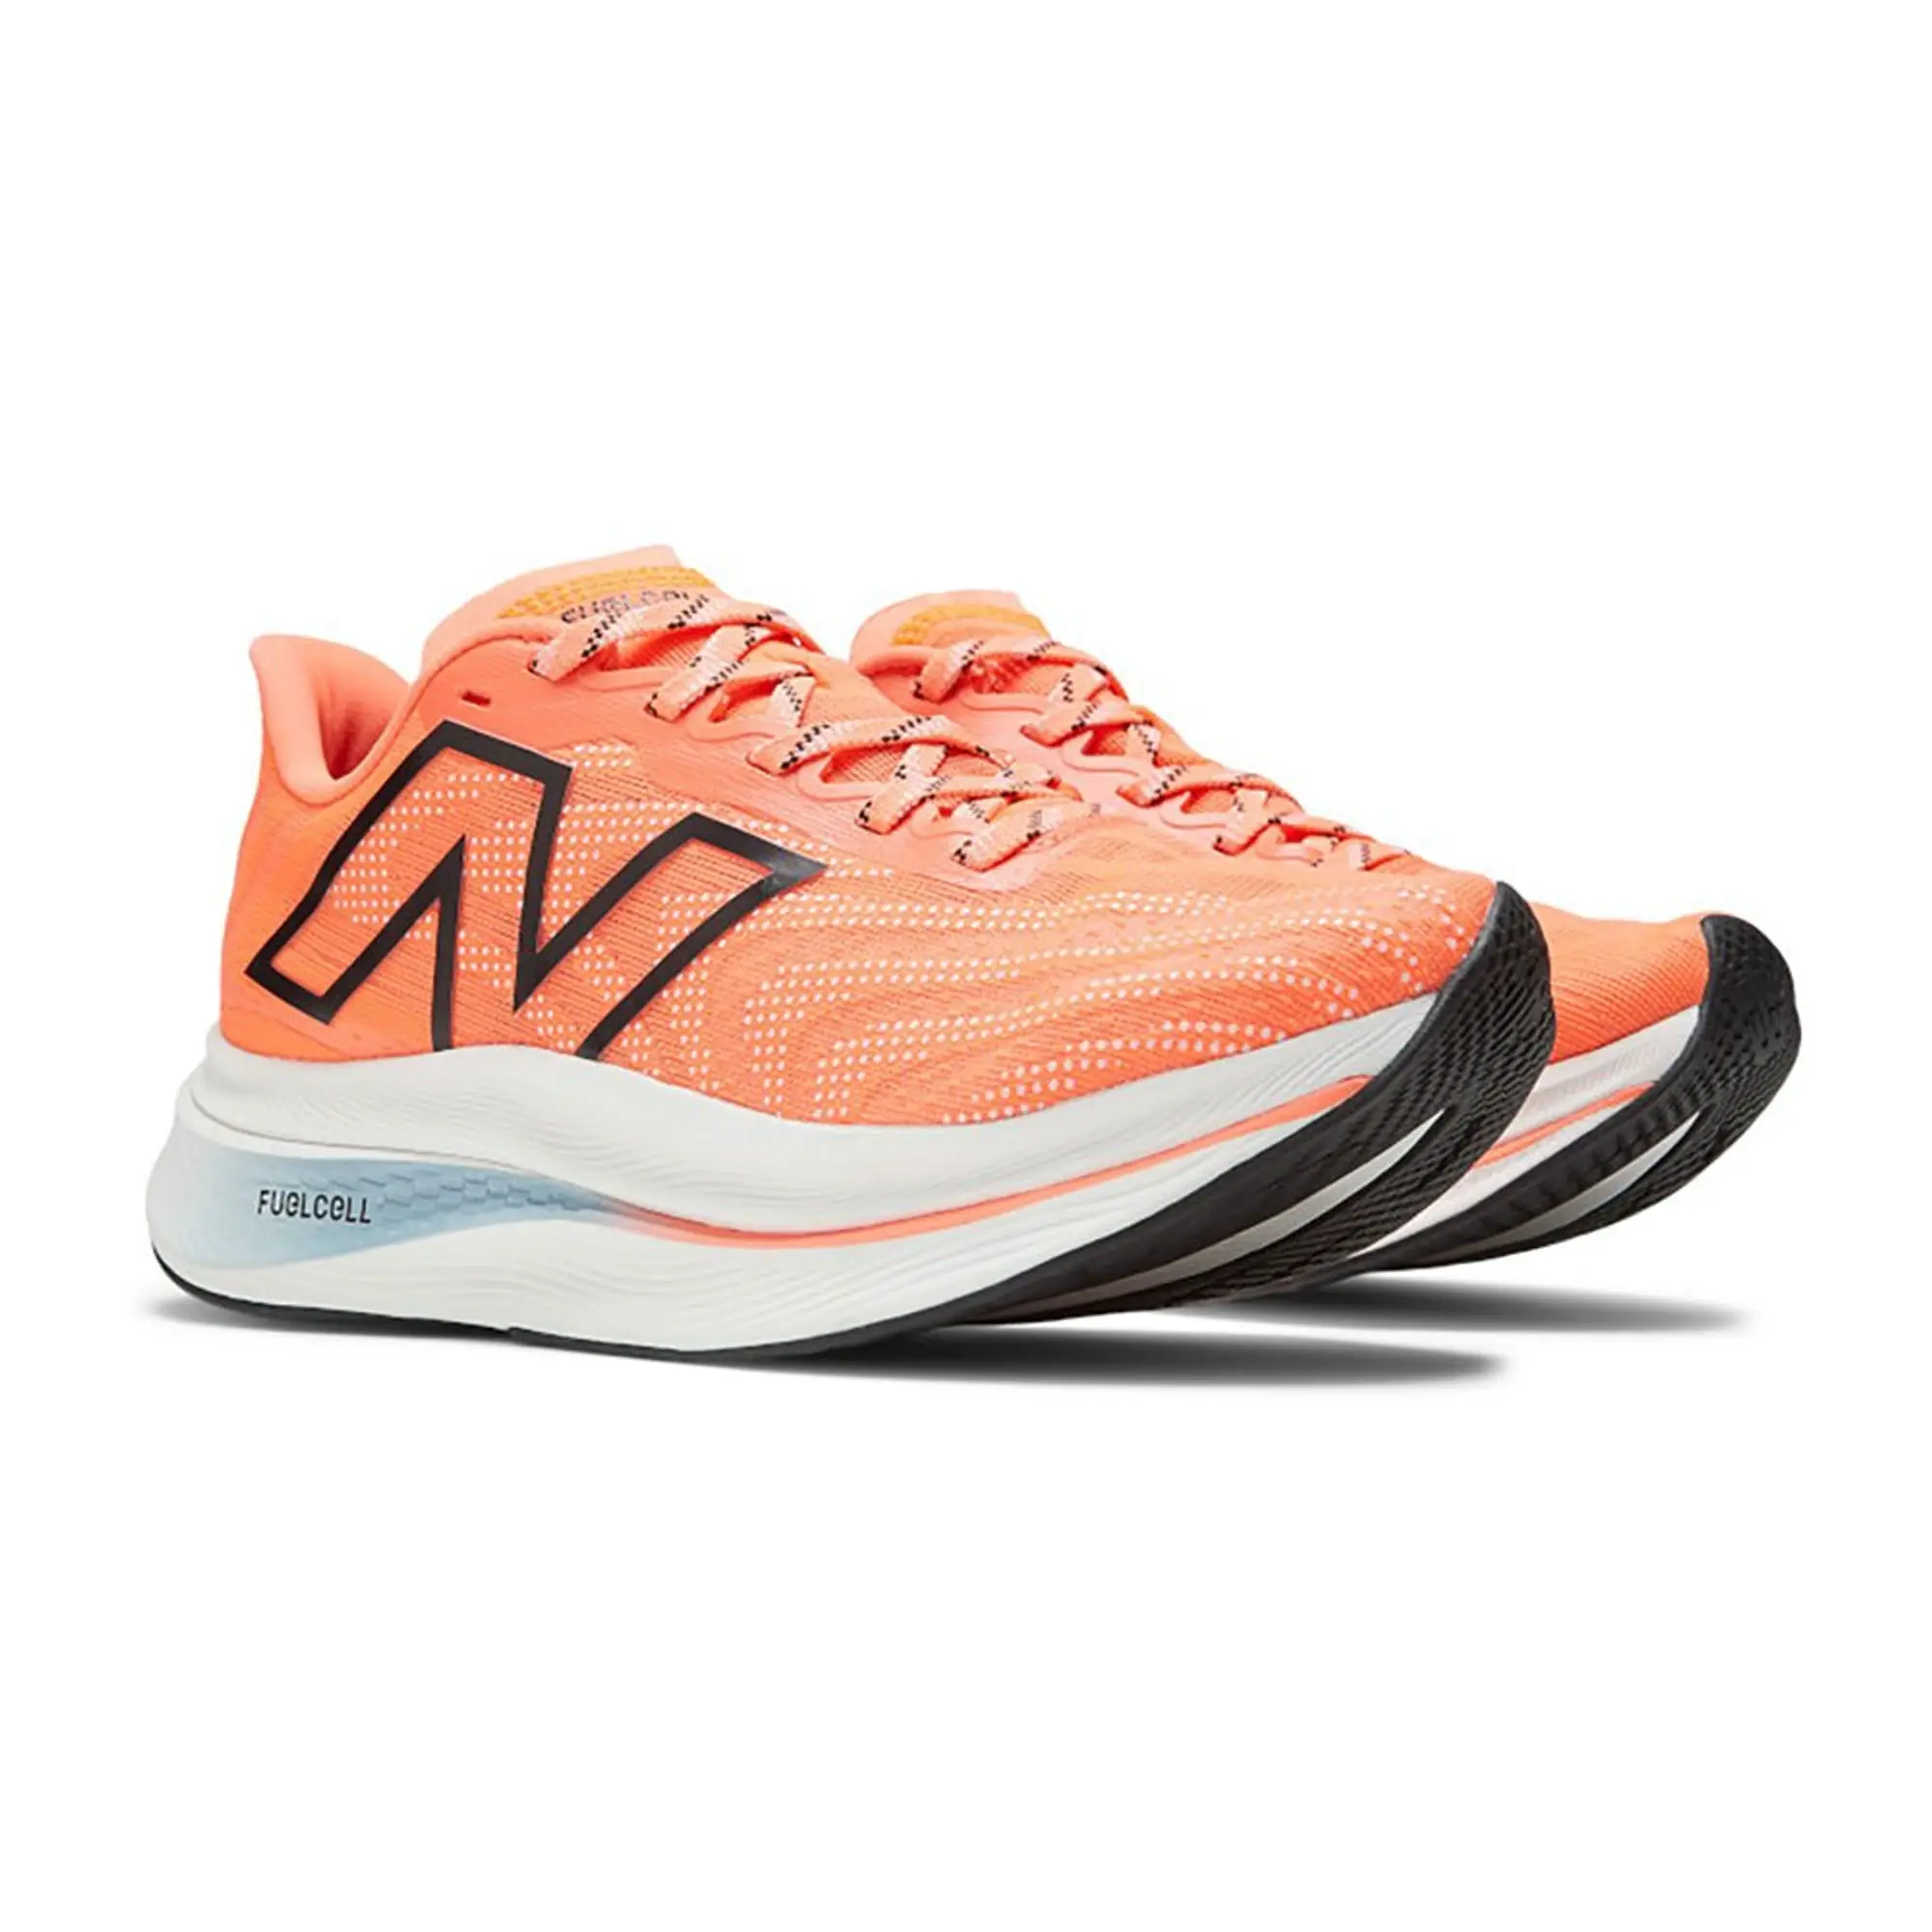 New Balance Fuelcell Supercomp Trainer V2 Running Shoes  - Orange